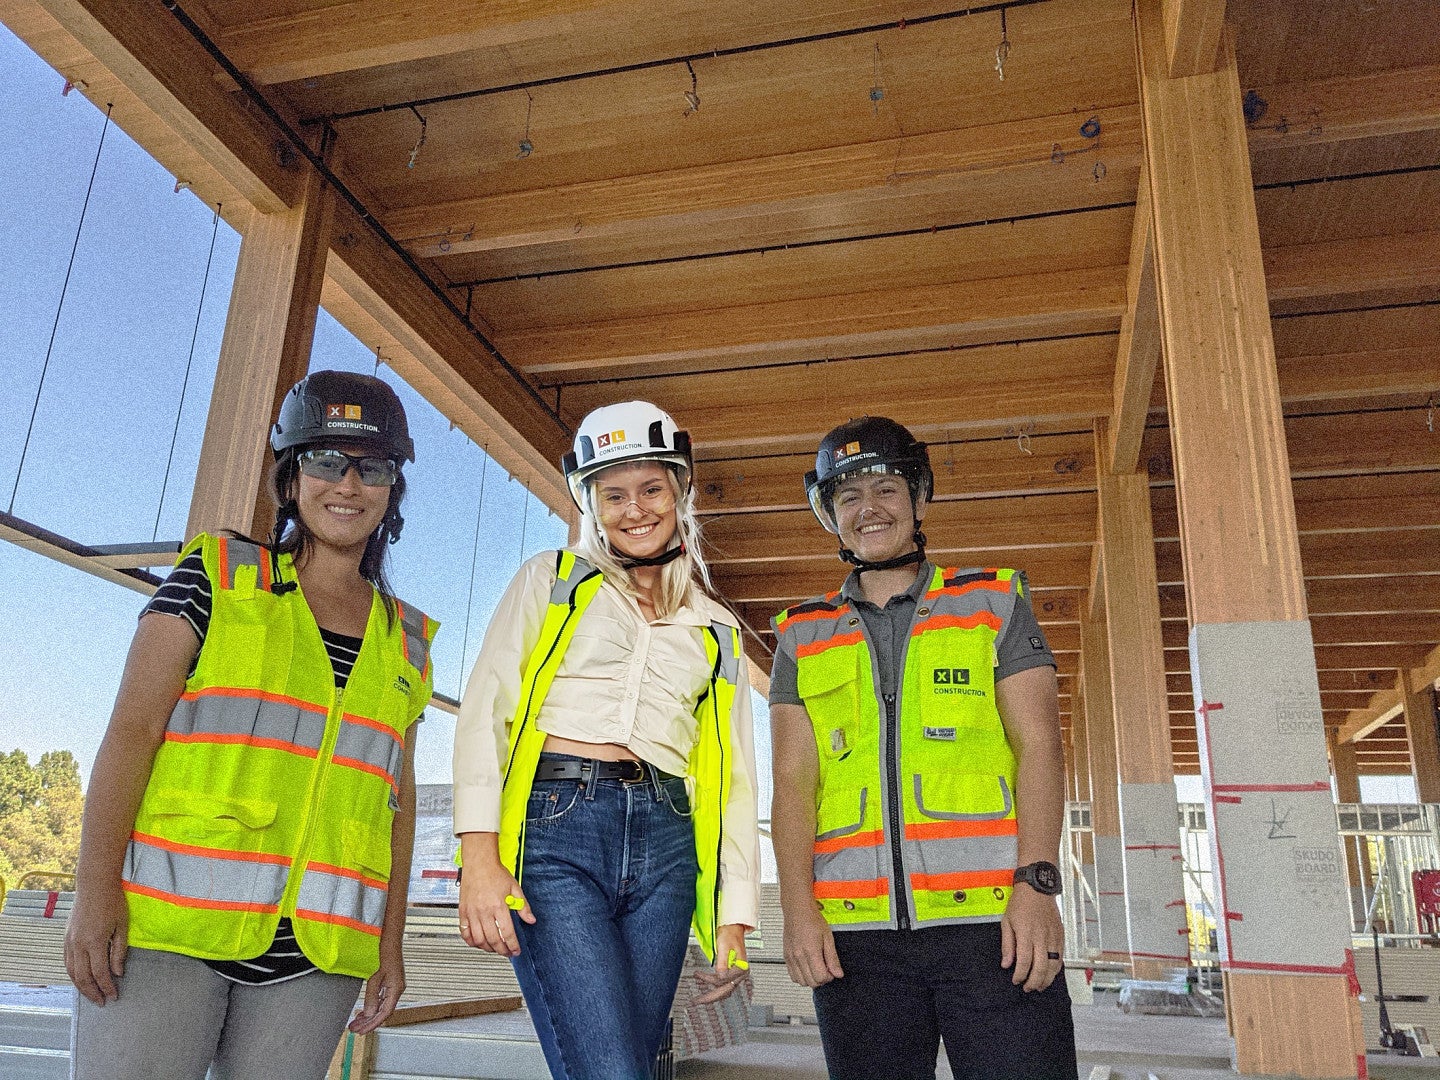 Honour and company posing in hard hats and high-visibility vests in a wooden frame of a building